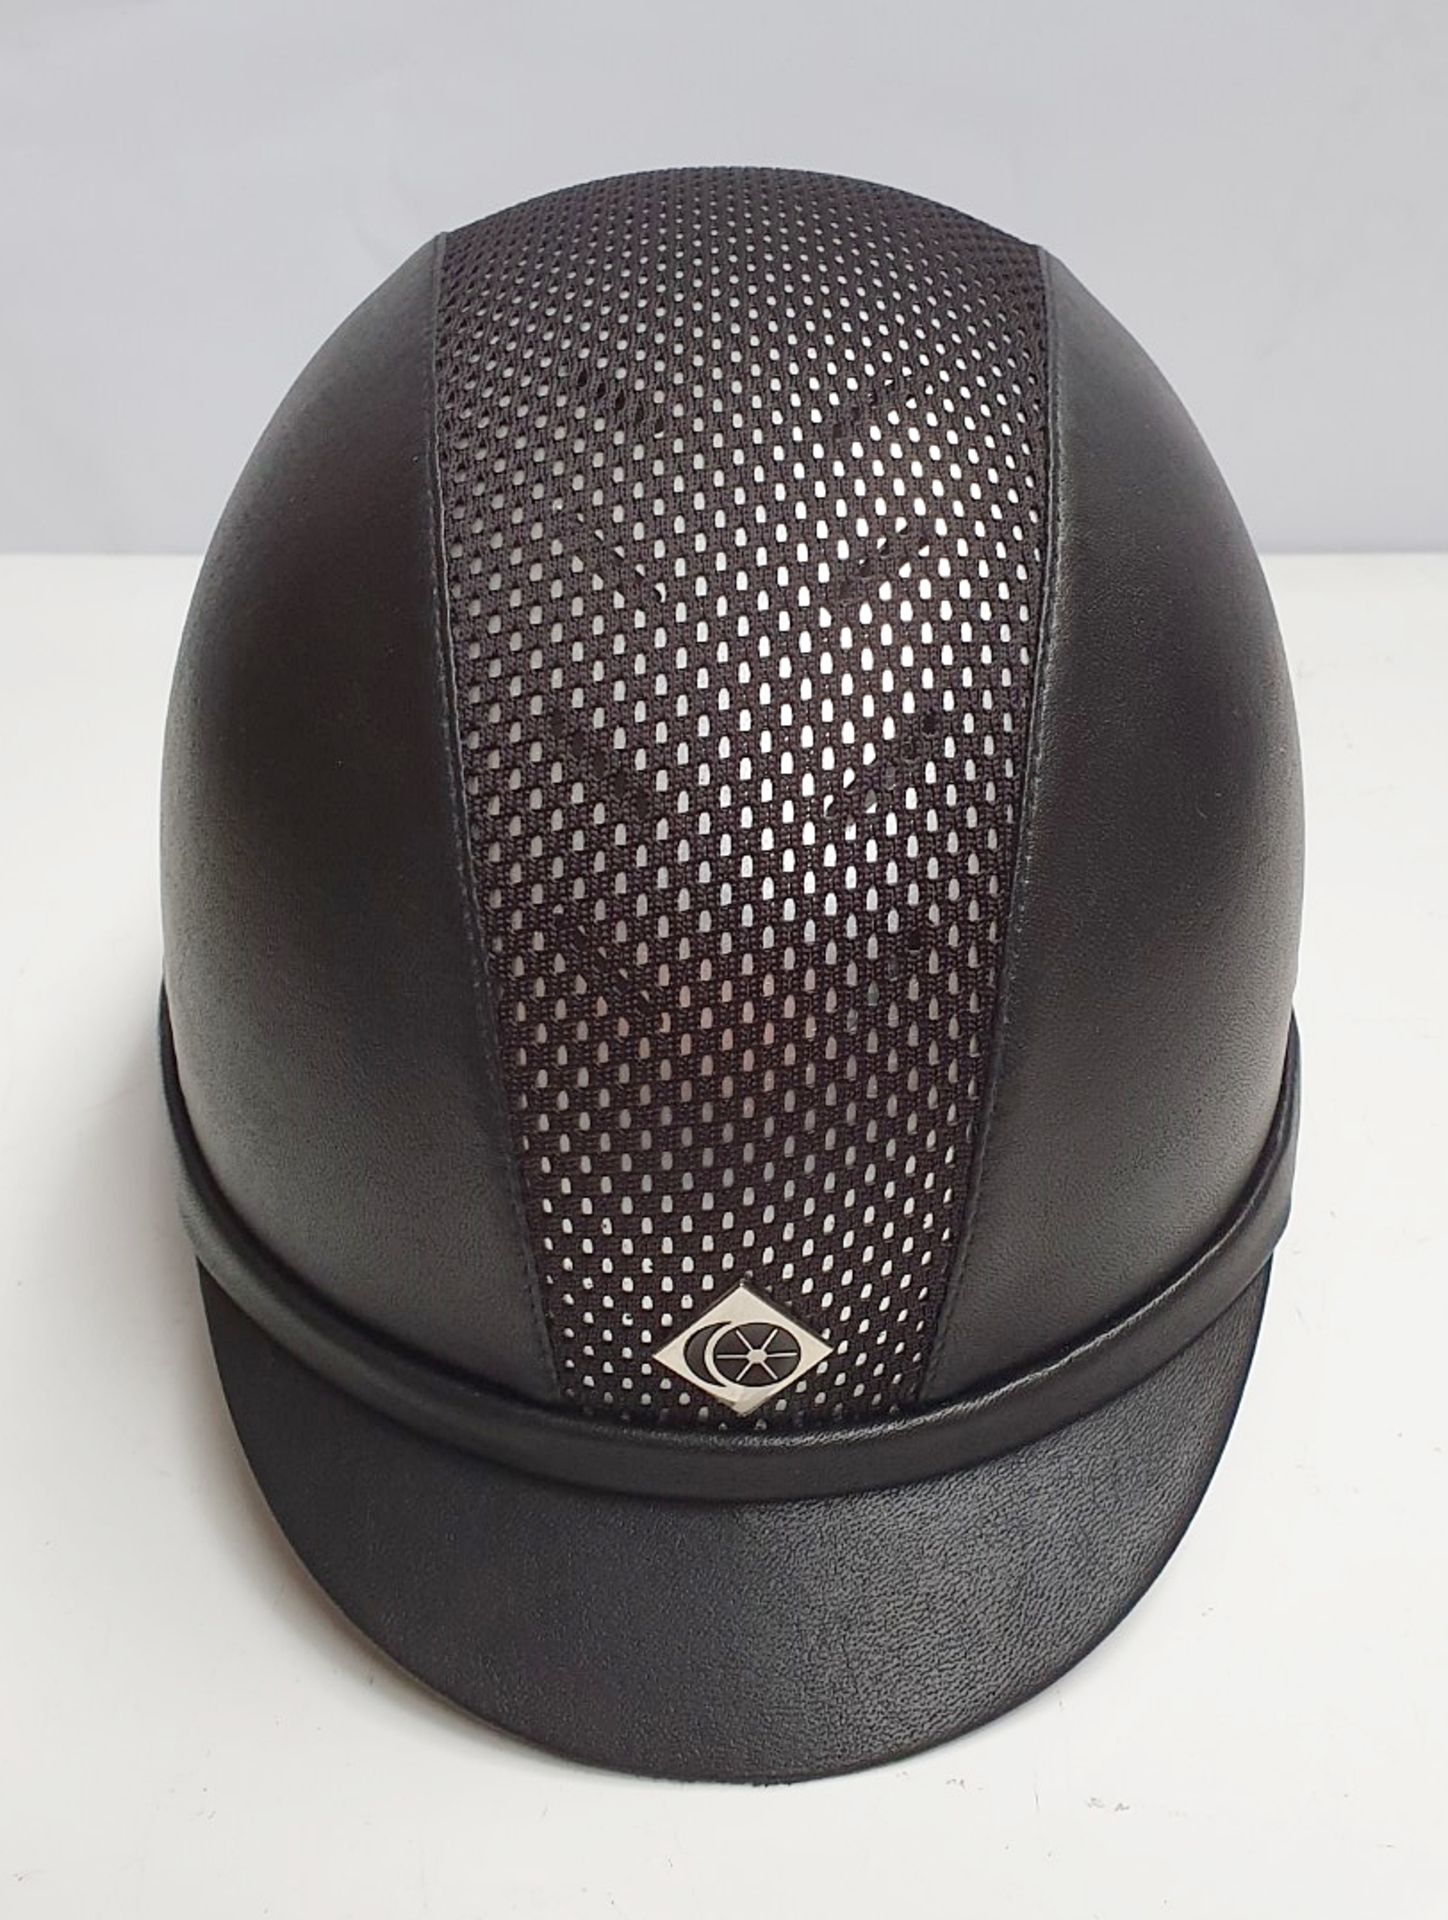 1 x Charles and Owen Horse Riding Helmet in Black / Silver and Mesh - Size 54cm - Ref722 - CL401 - B